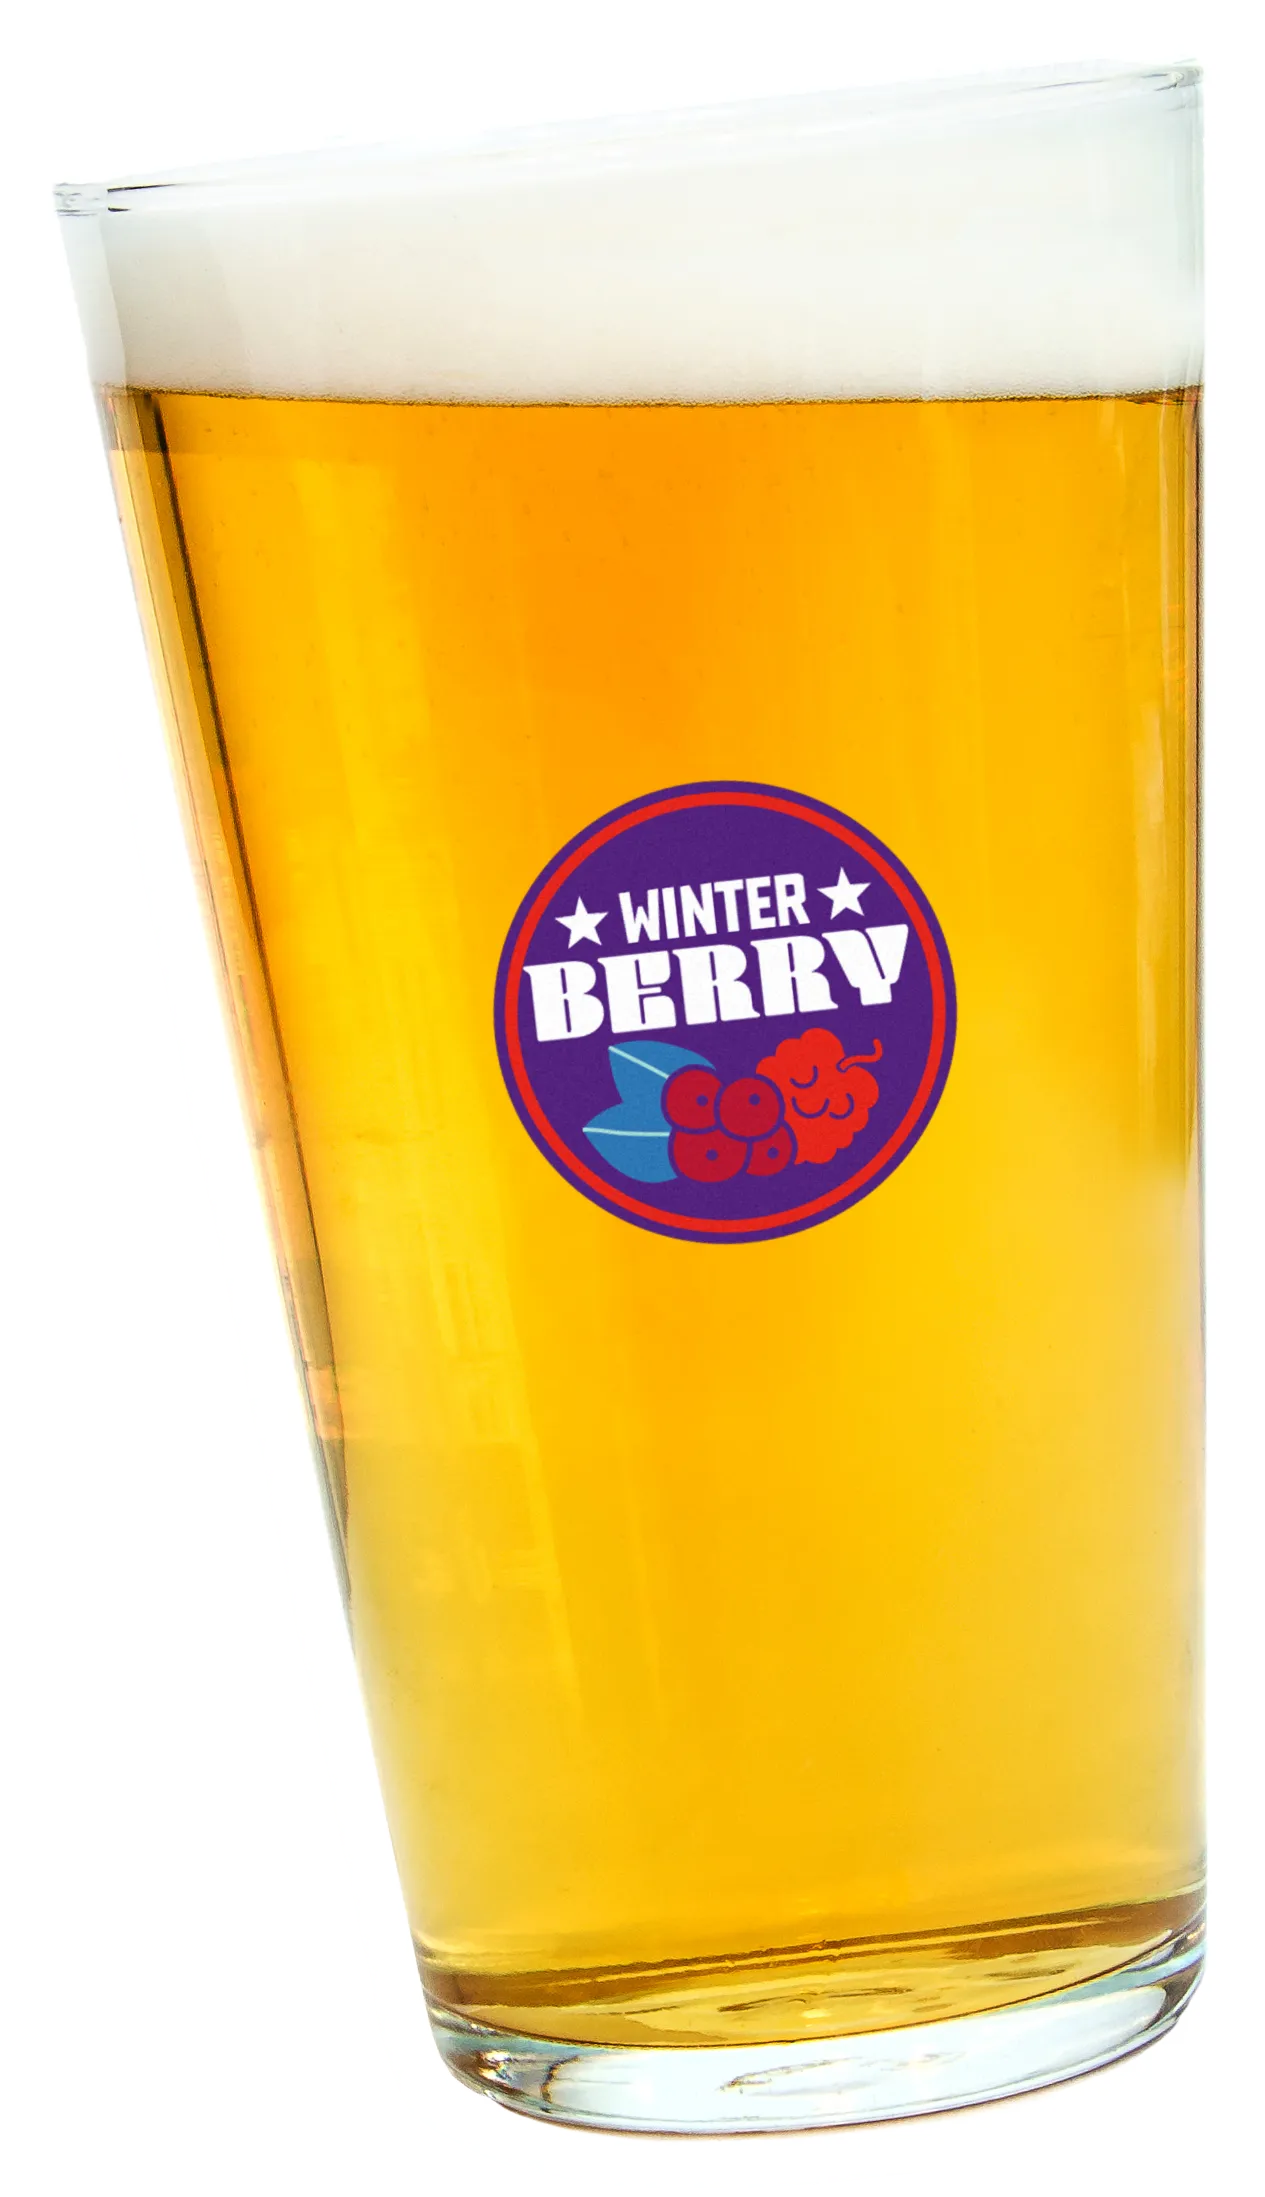 A tilted pint of beer with a "Winter Berry" logo.